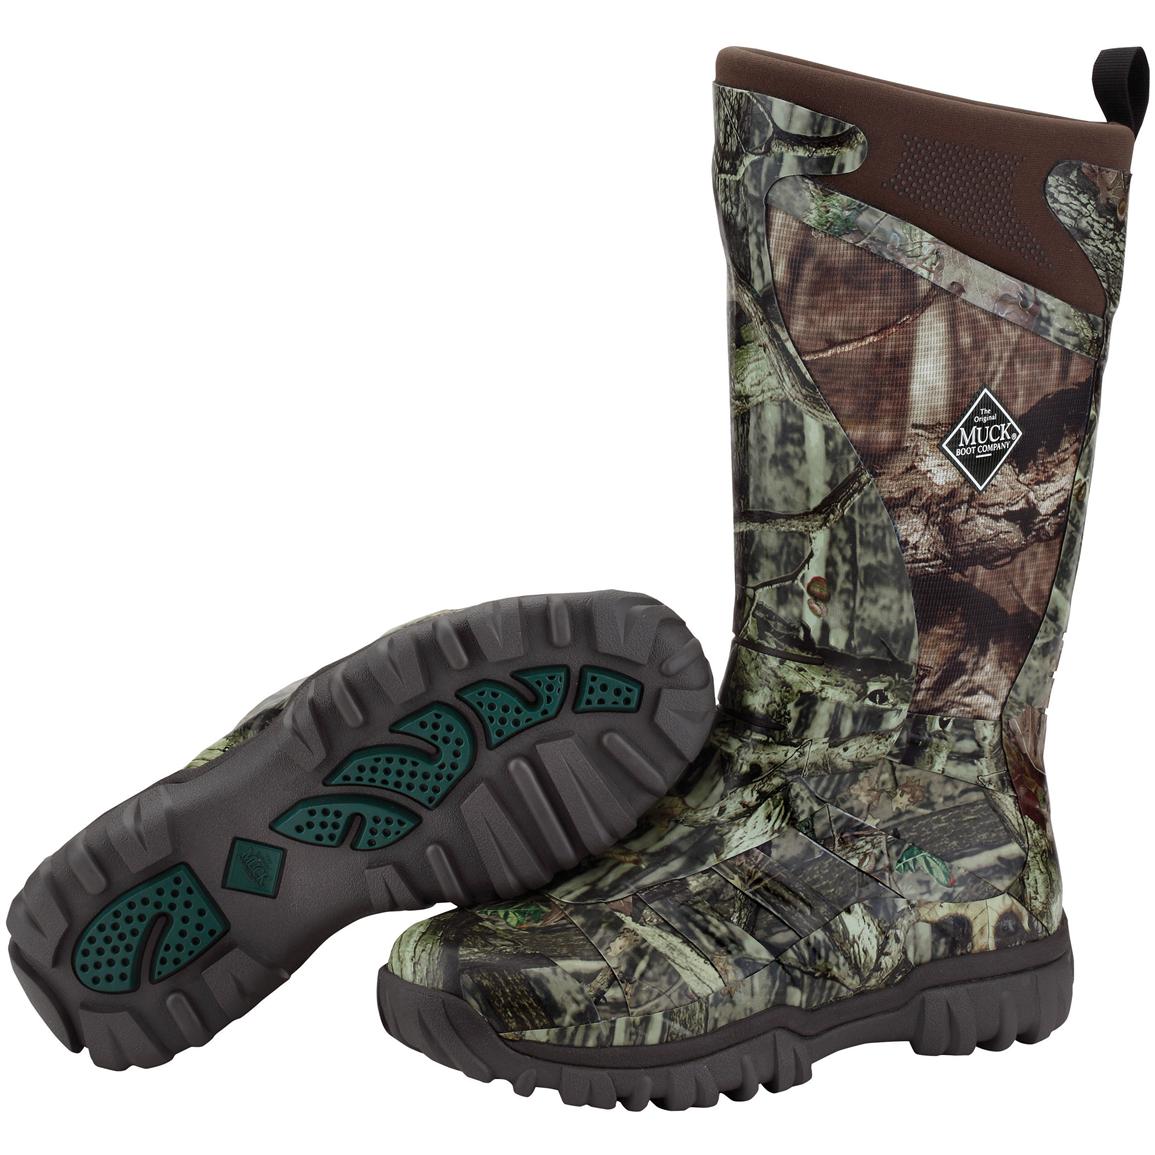 MUCK BOOT Men's Boots & Shoes | Boots & Shoes | Sportsman's Guide